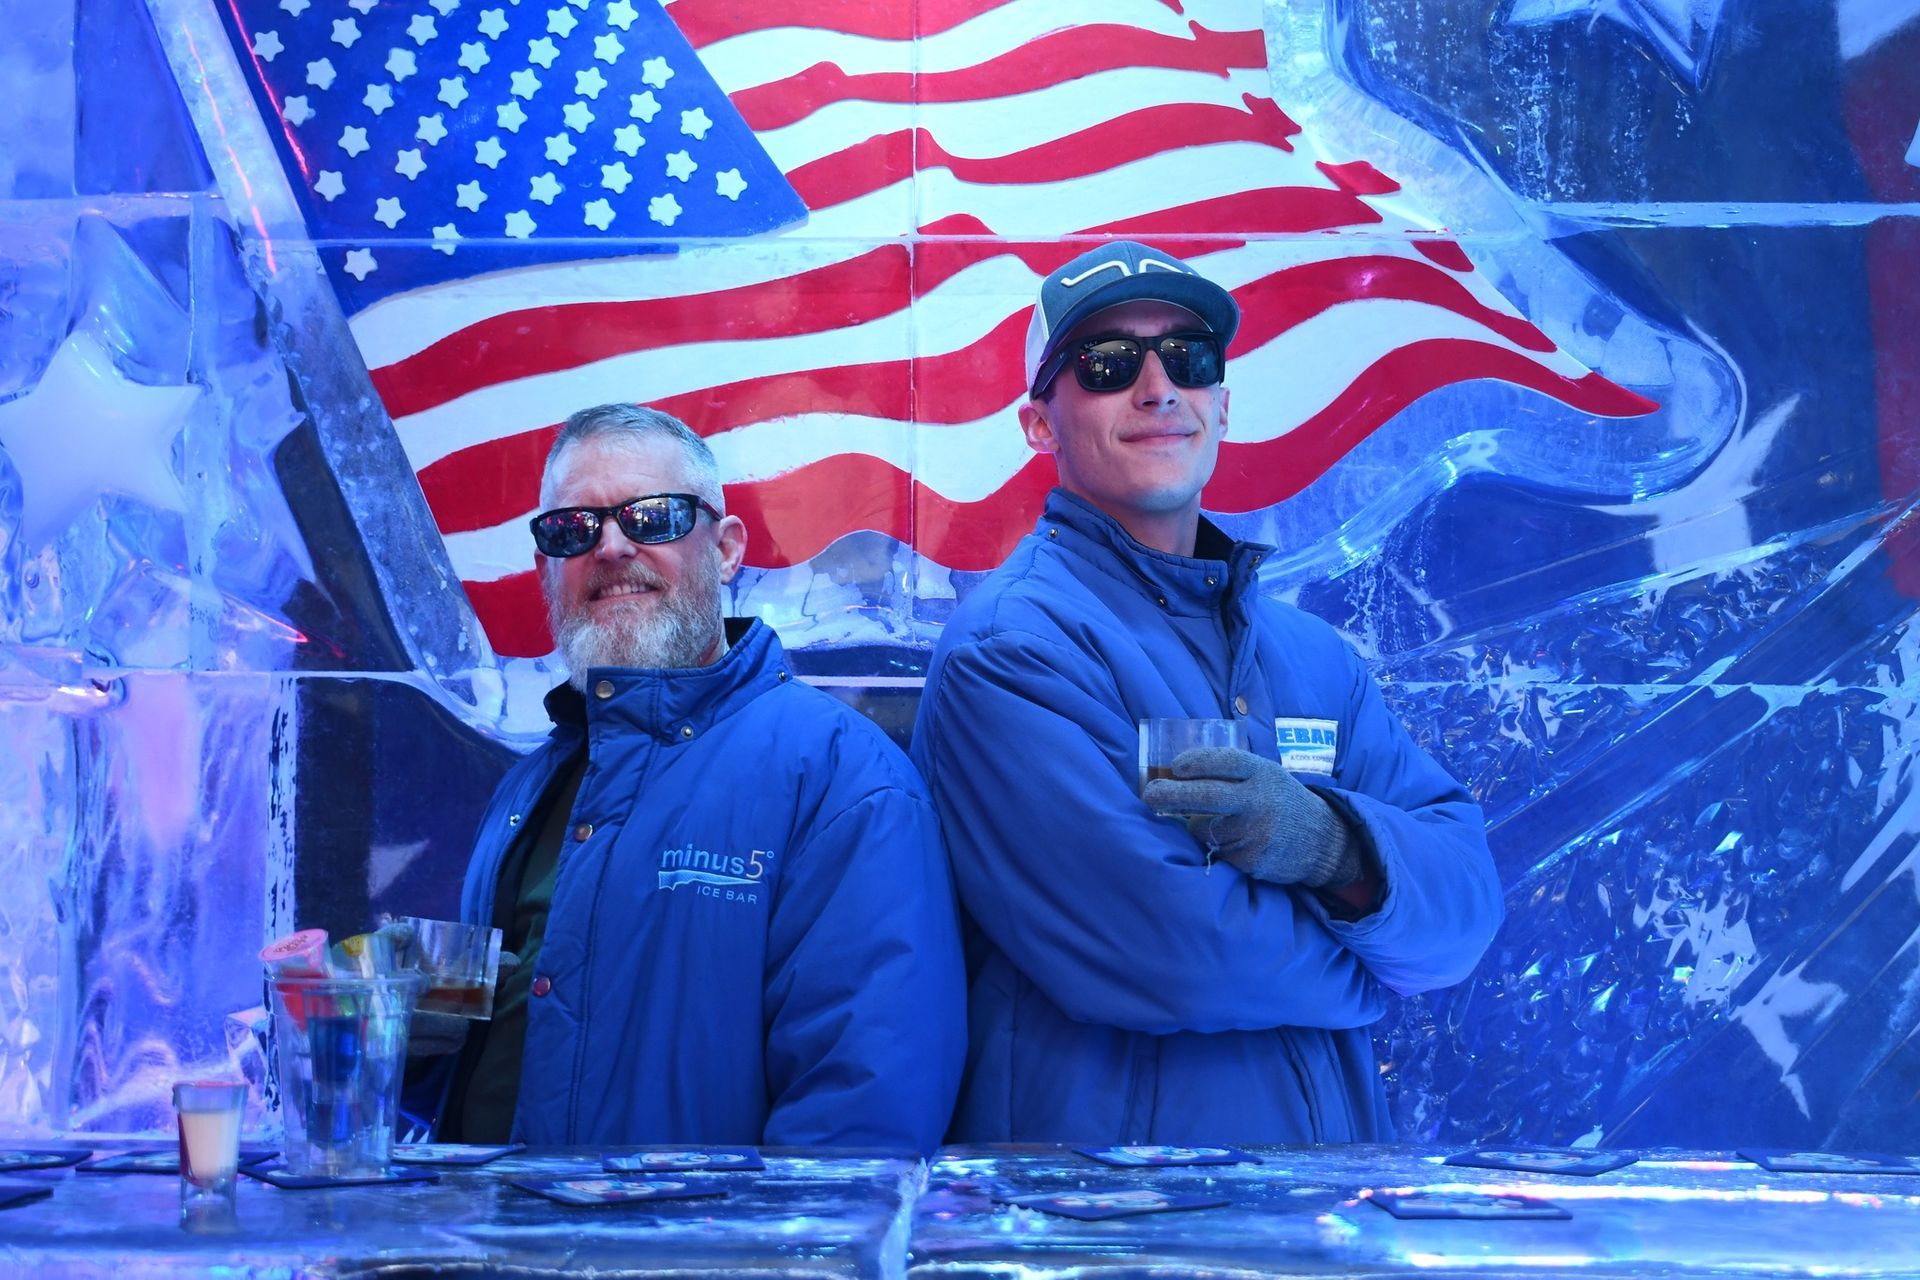 World's Largest Permanent Ice Bar: world record in Las Vegas